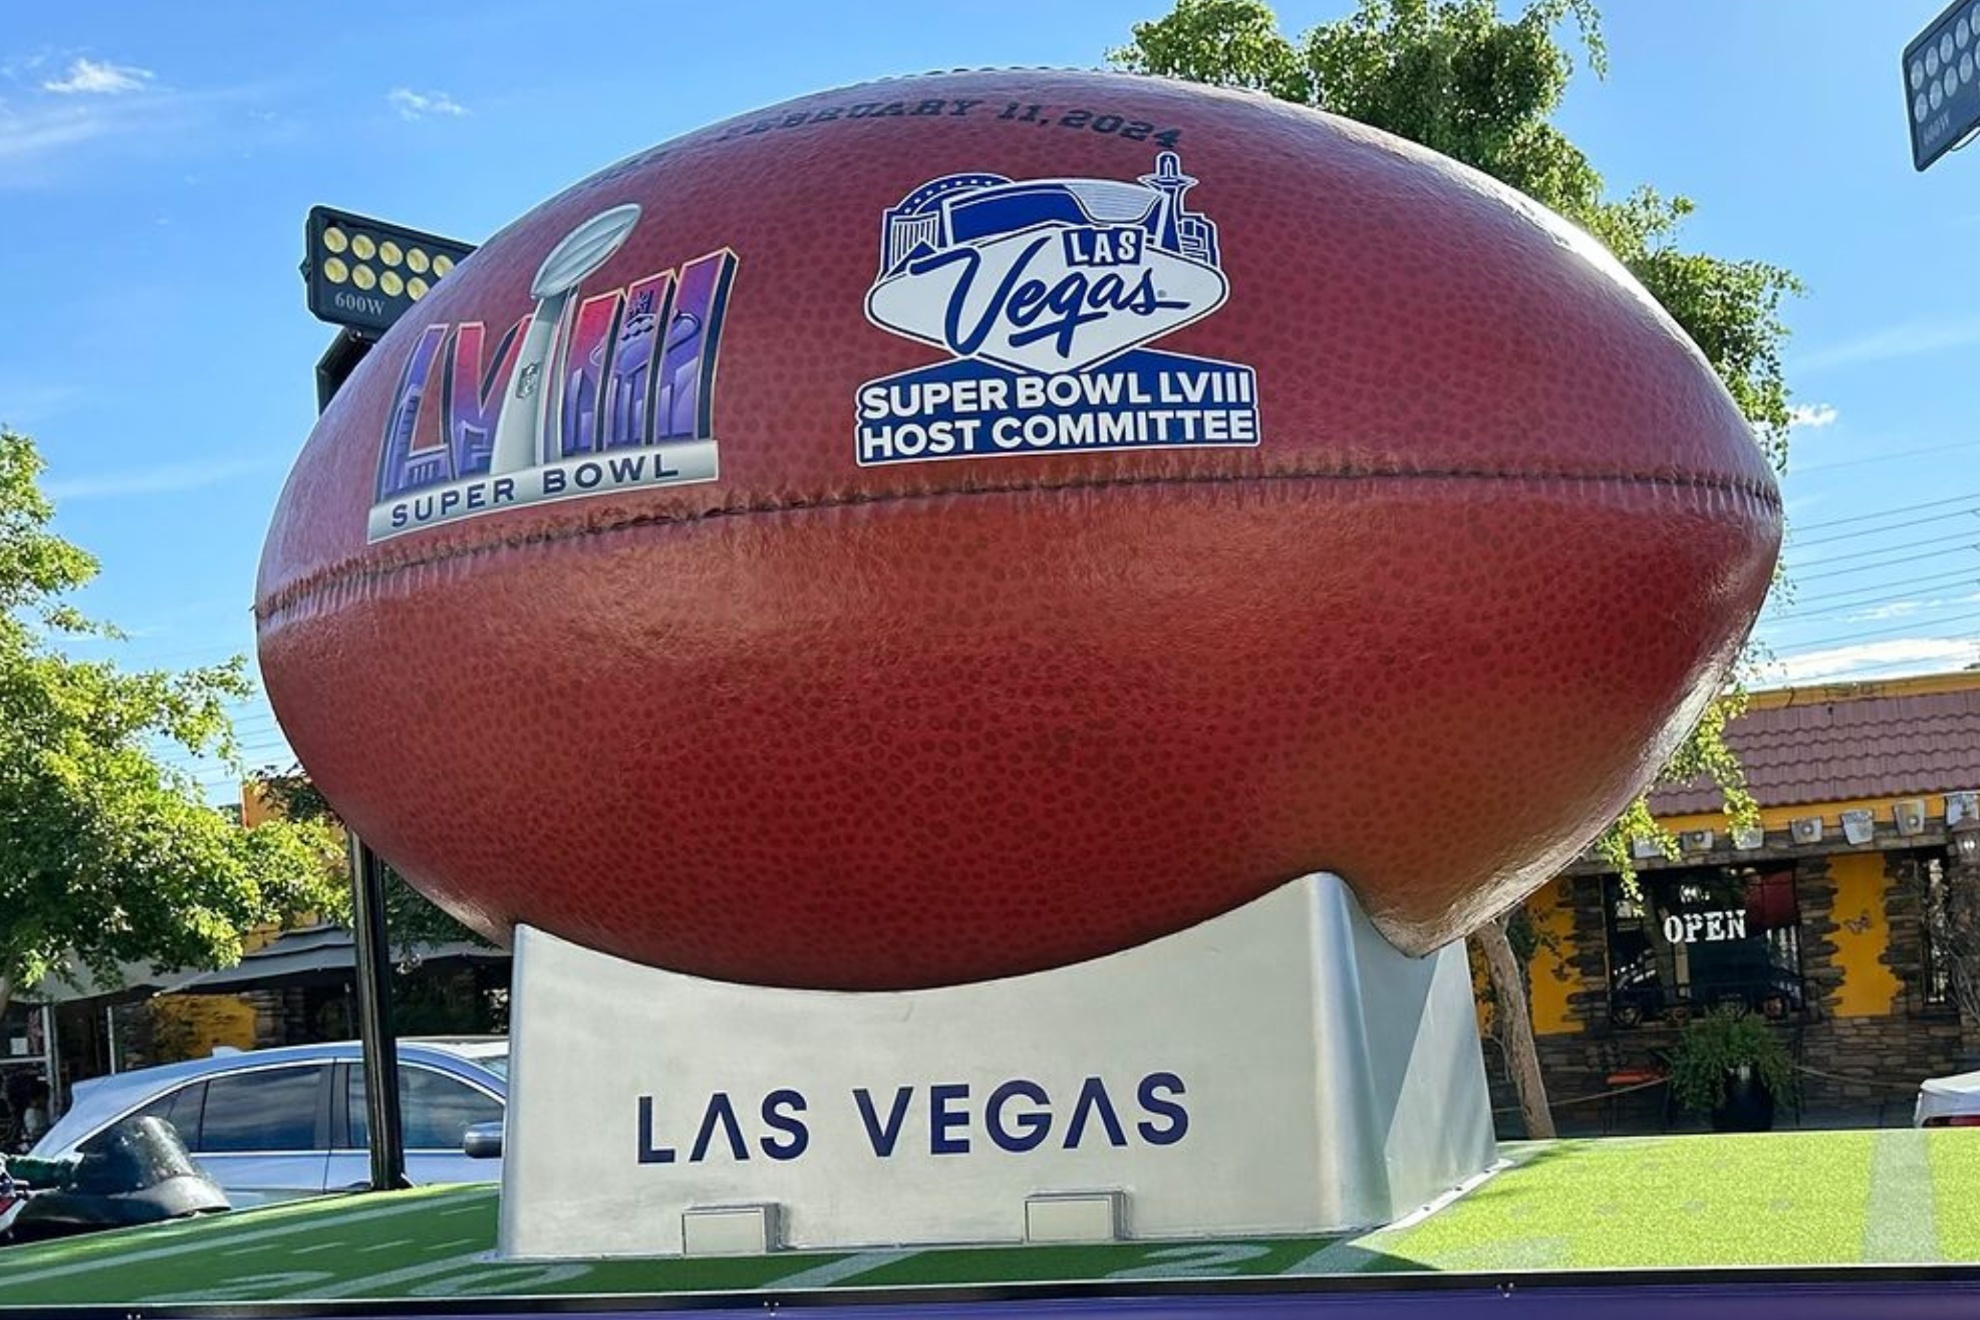 Everything is ready for the Super Bowl LVIII in Las Vegas.